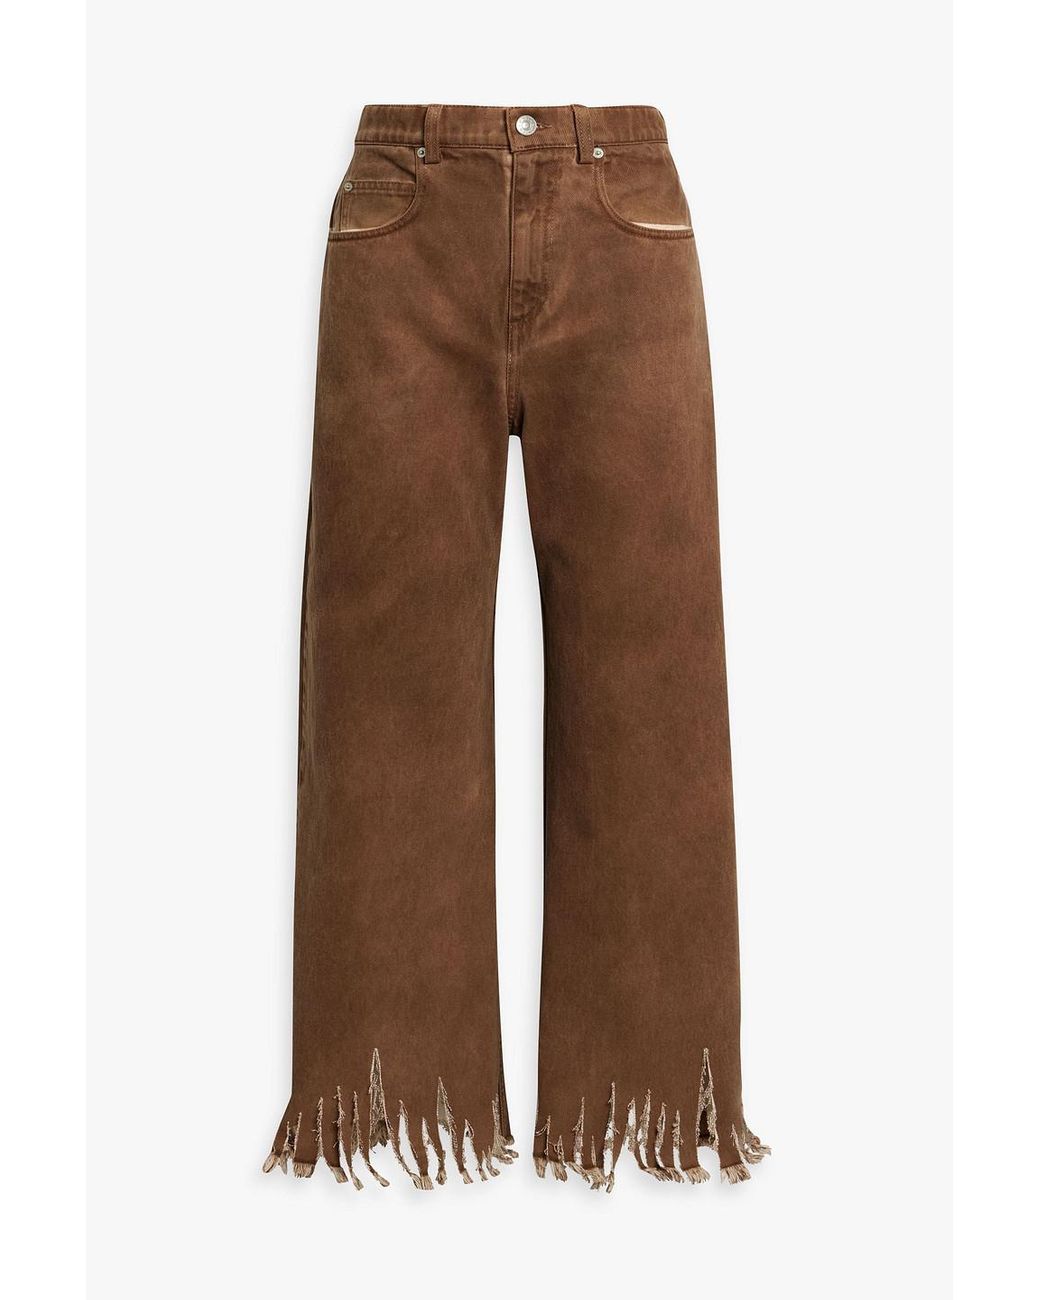 Marni Distressed High-rise Wide-leg Jeans in Brown | Lyst